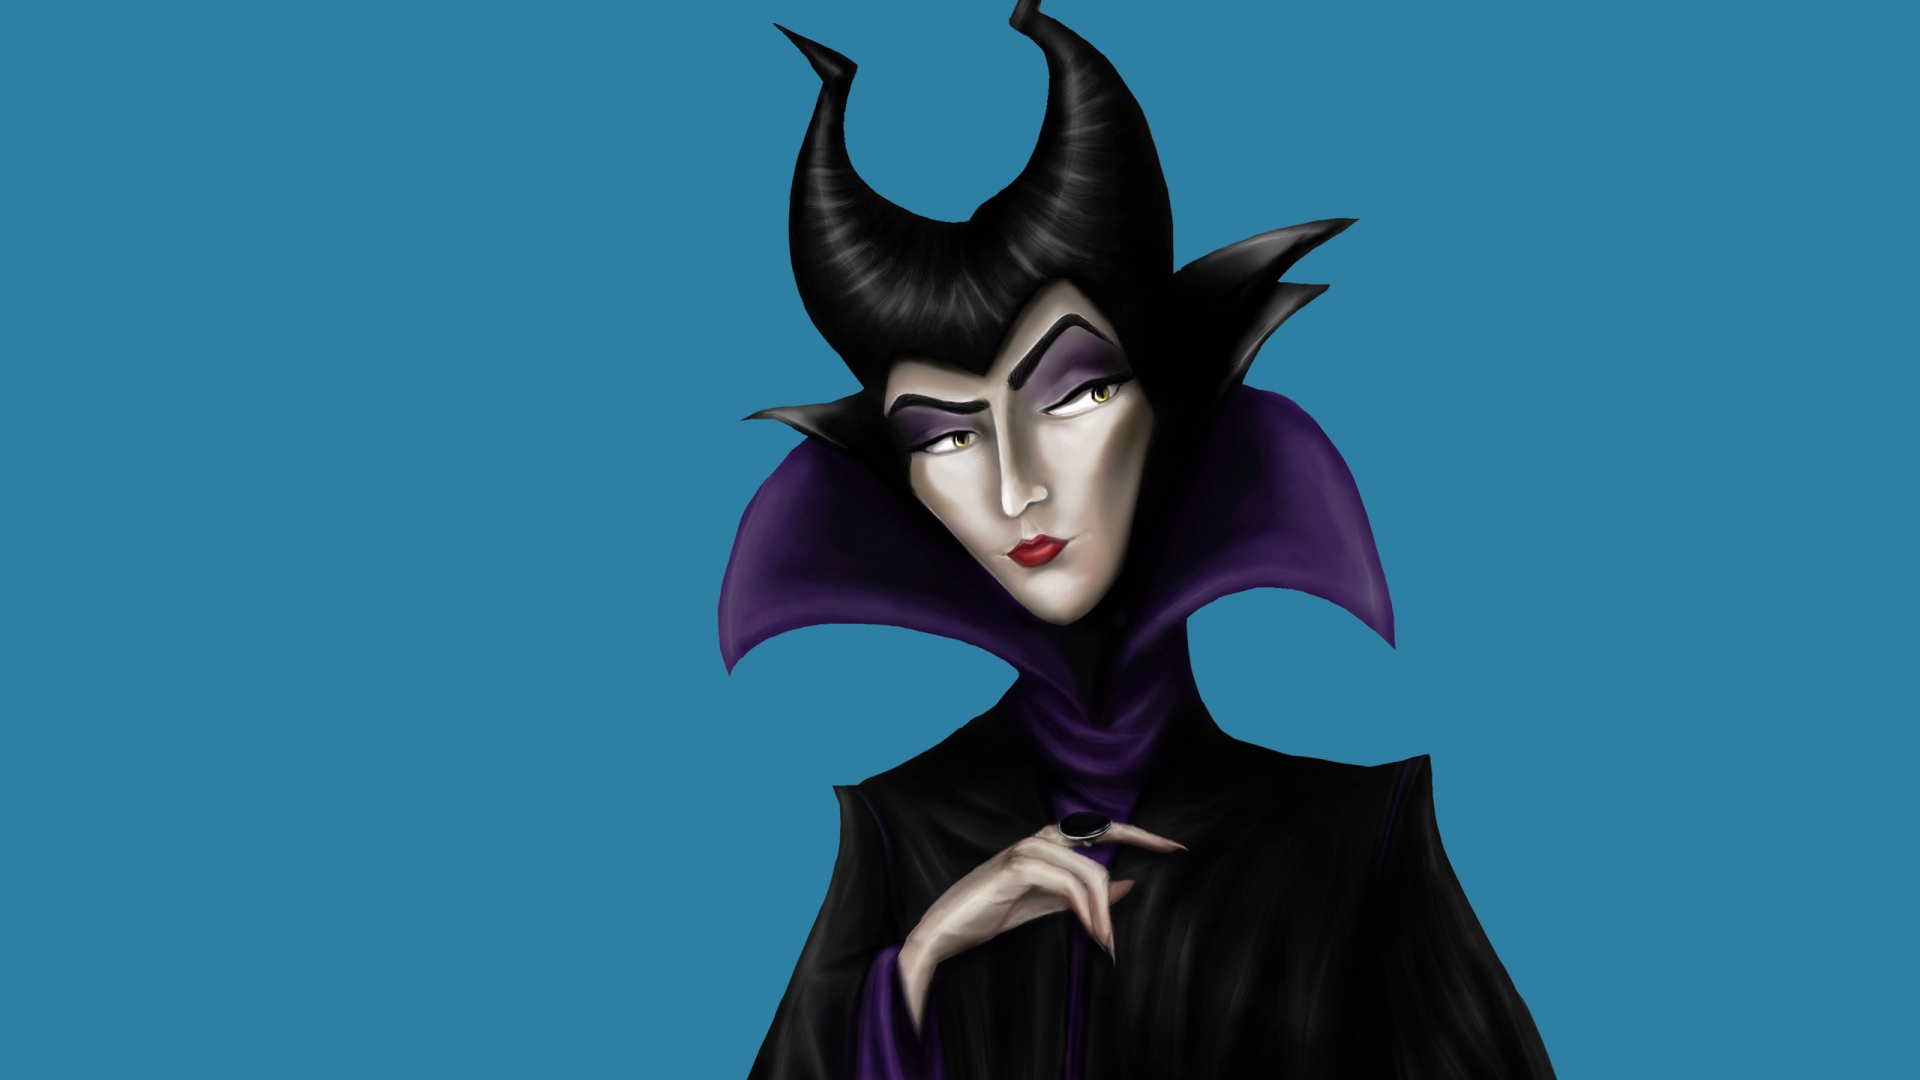 Maleficent Drawing for 1920 x 1080 HDTV 1080p resolution